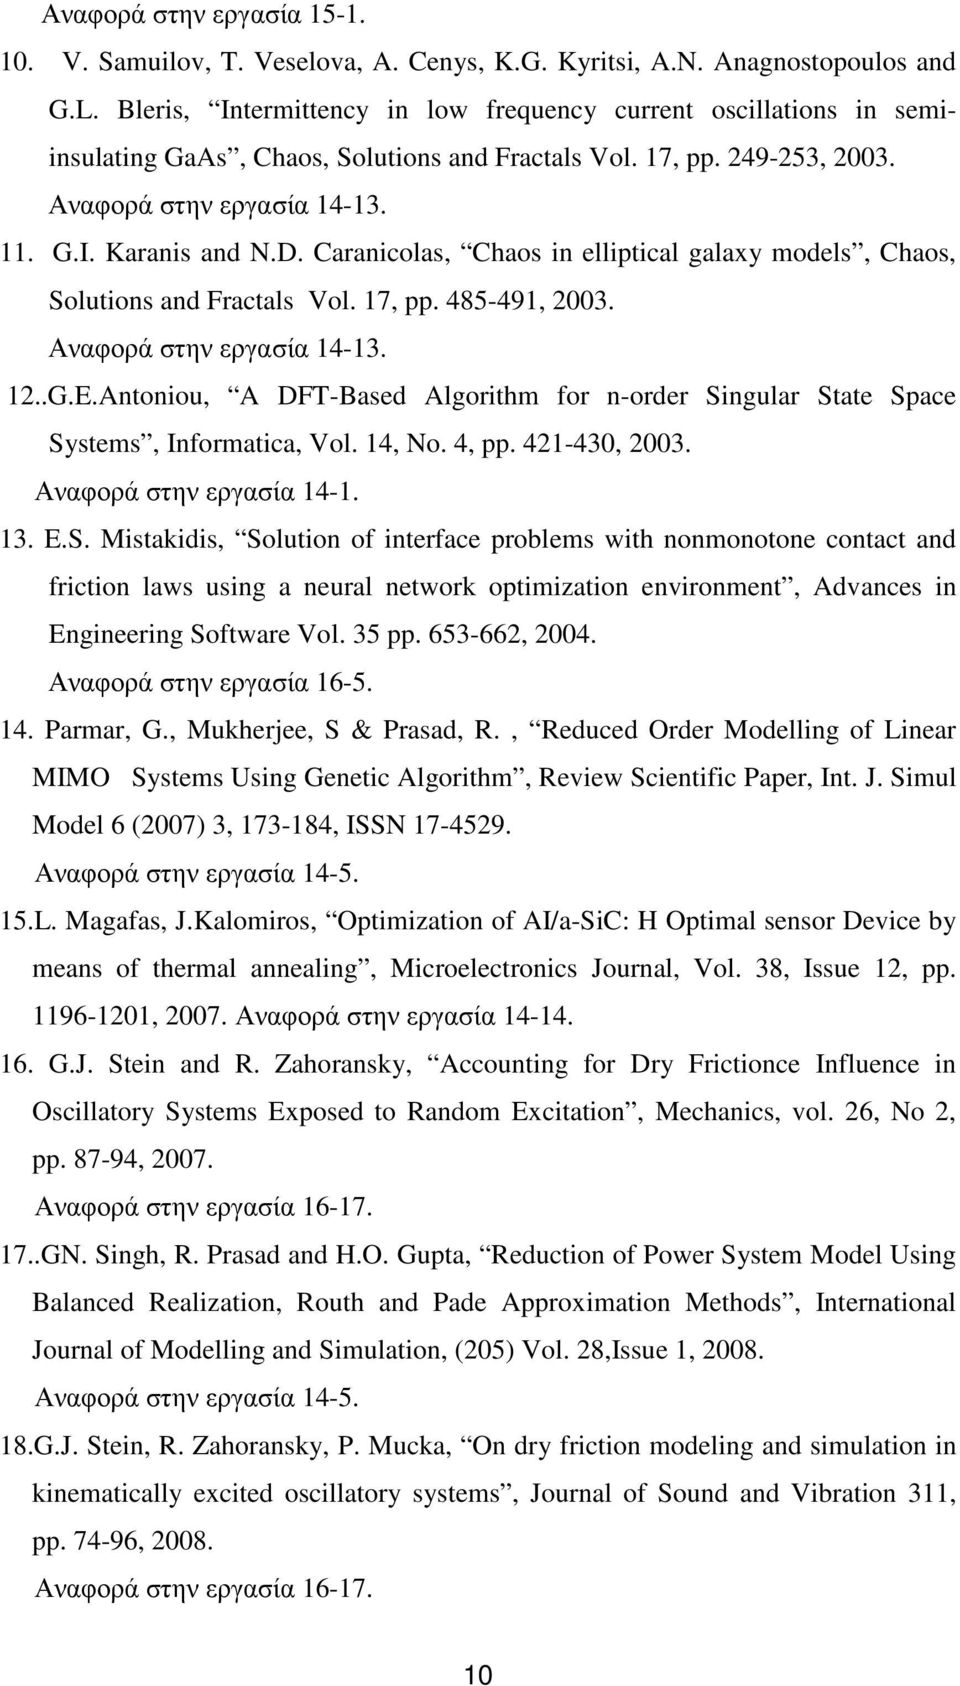 Caranicolas, Chaos in elliptical galaxy models, Chaos, Solutions and Fractals Vol. 17, pp. 485-491, 2003. Αναφορά στην εργασία 14-13. 12..G.E.